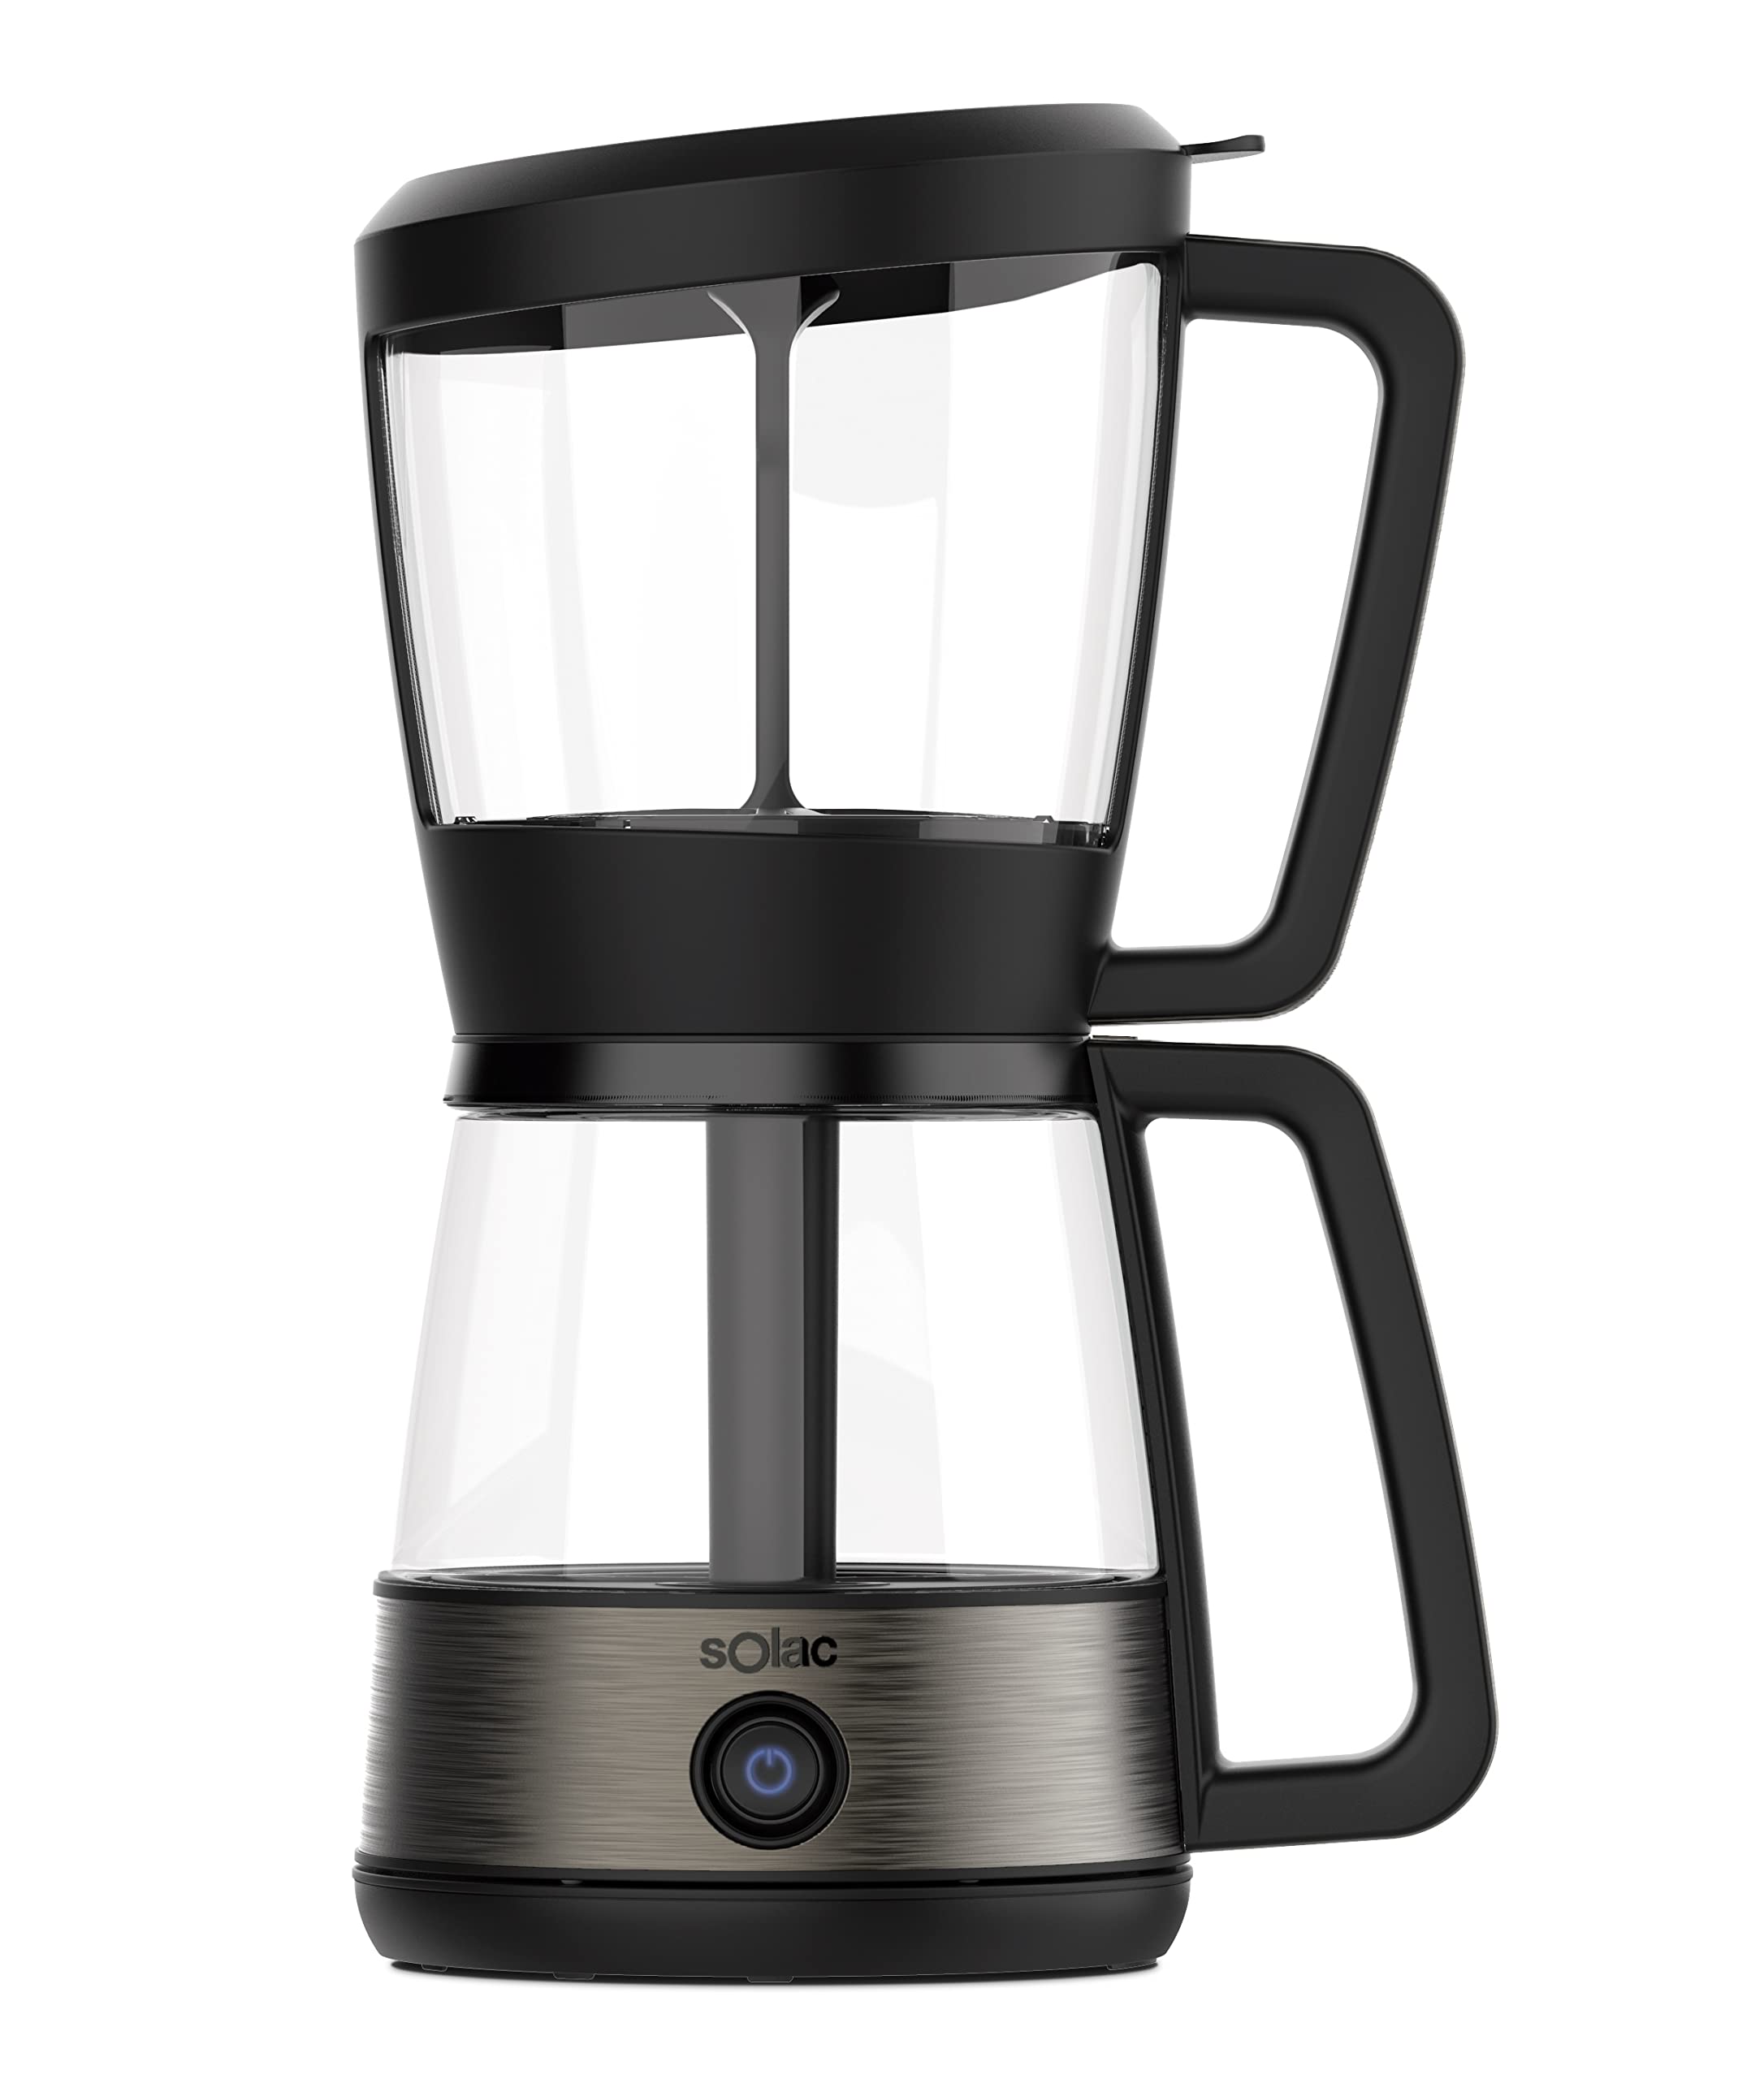 Solac SIPHON BREWER 3-in-1 Vacuum Coffee Maker